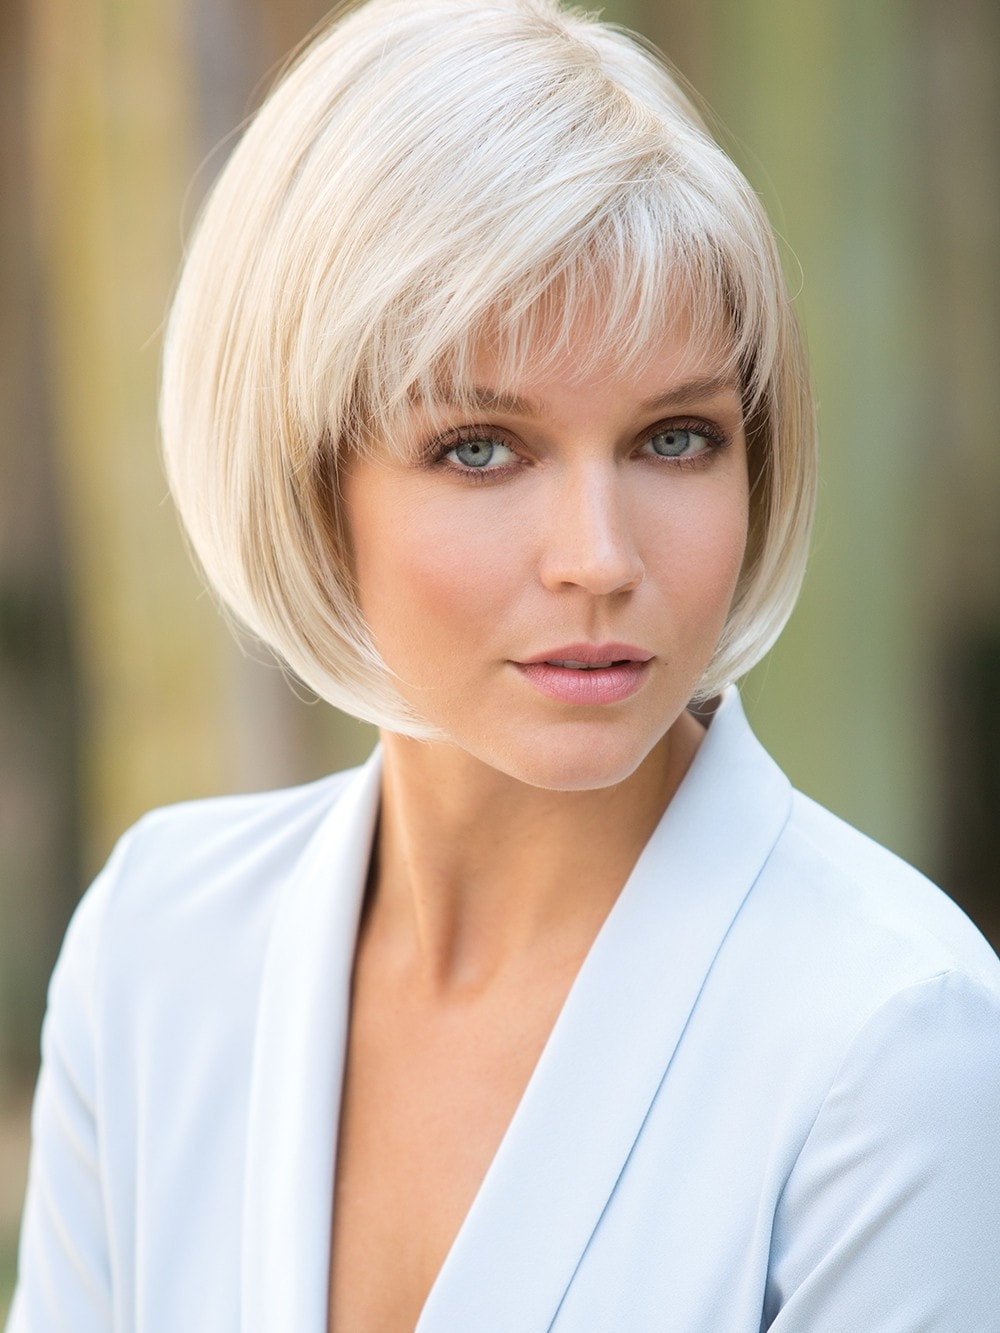 CORY by Noriko in CREAMY BLONDE | Platinum and Light Gold Blonde evenly blended PPC MAIN IMAGE